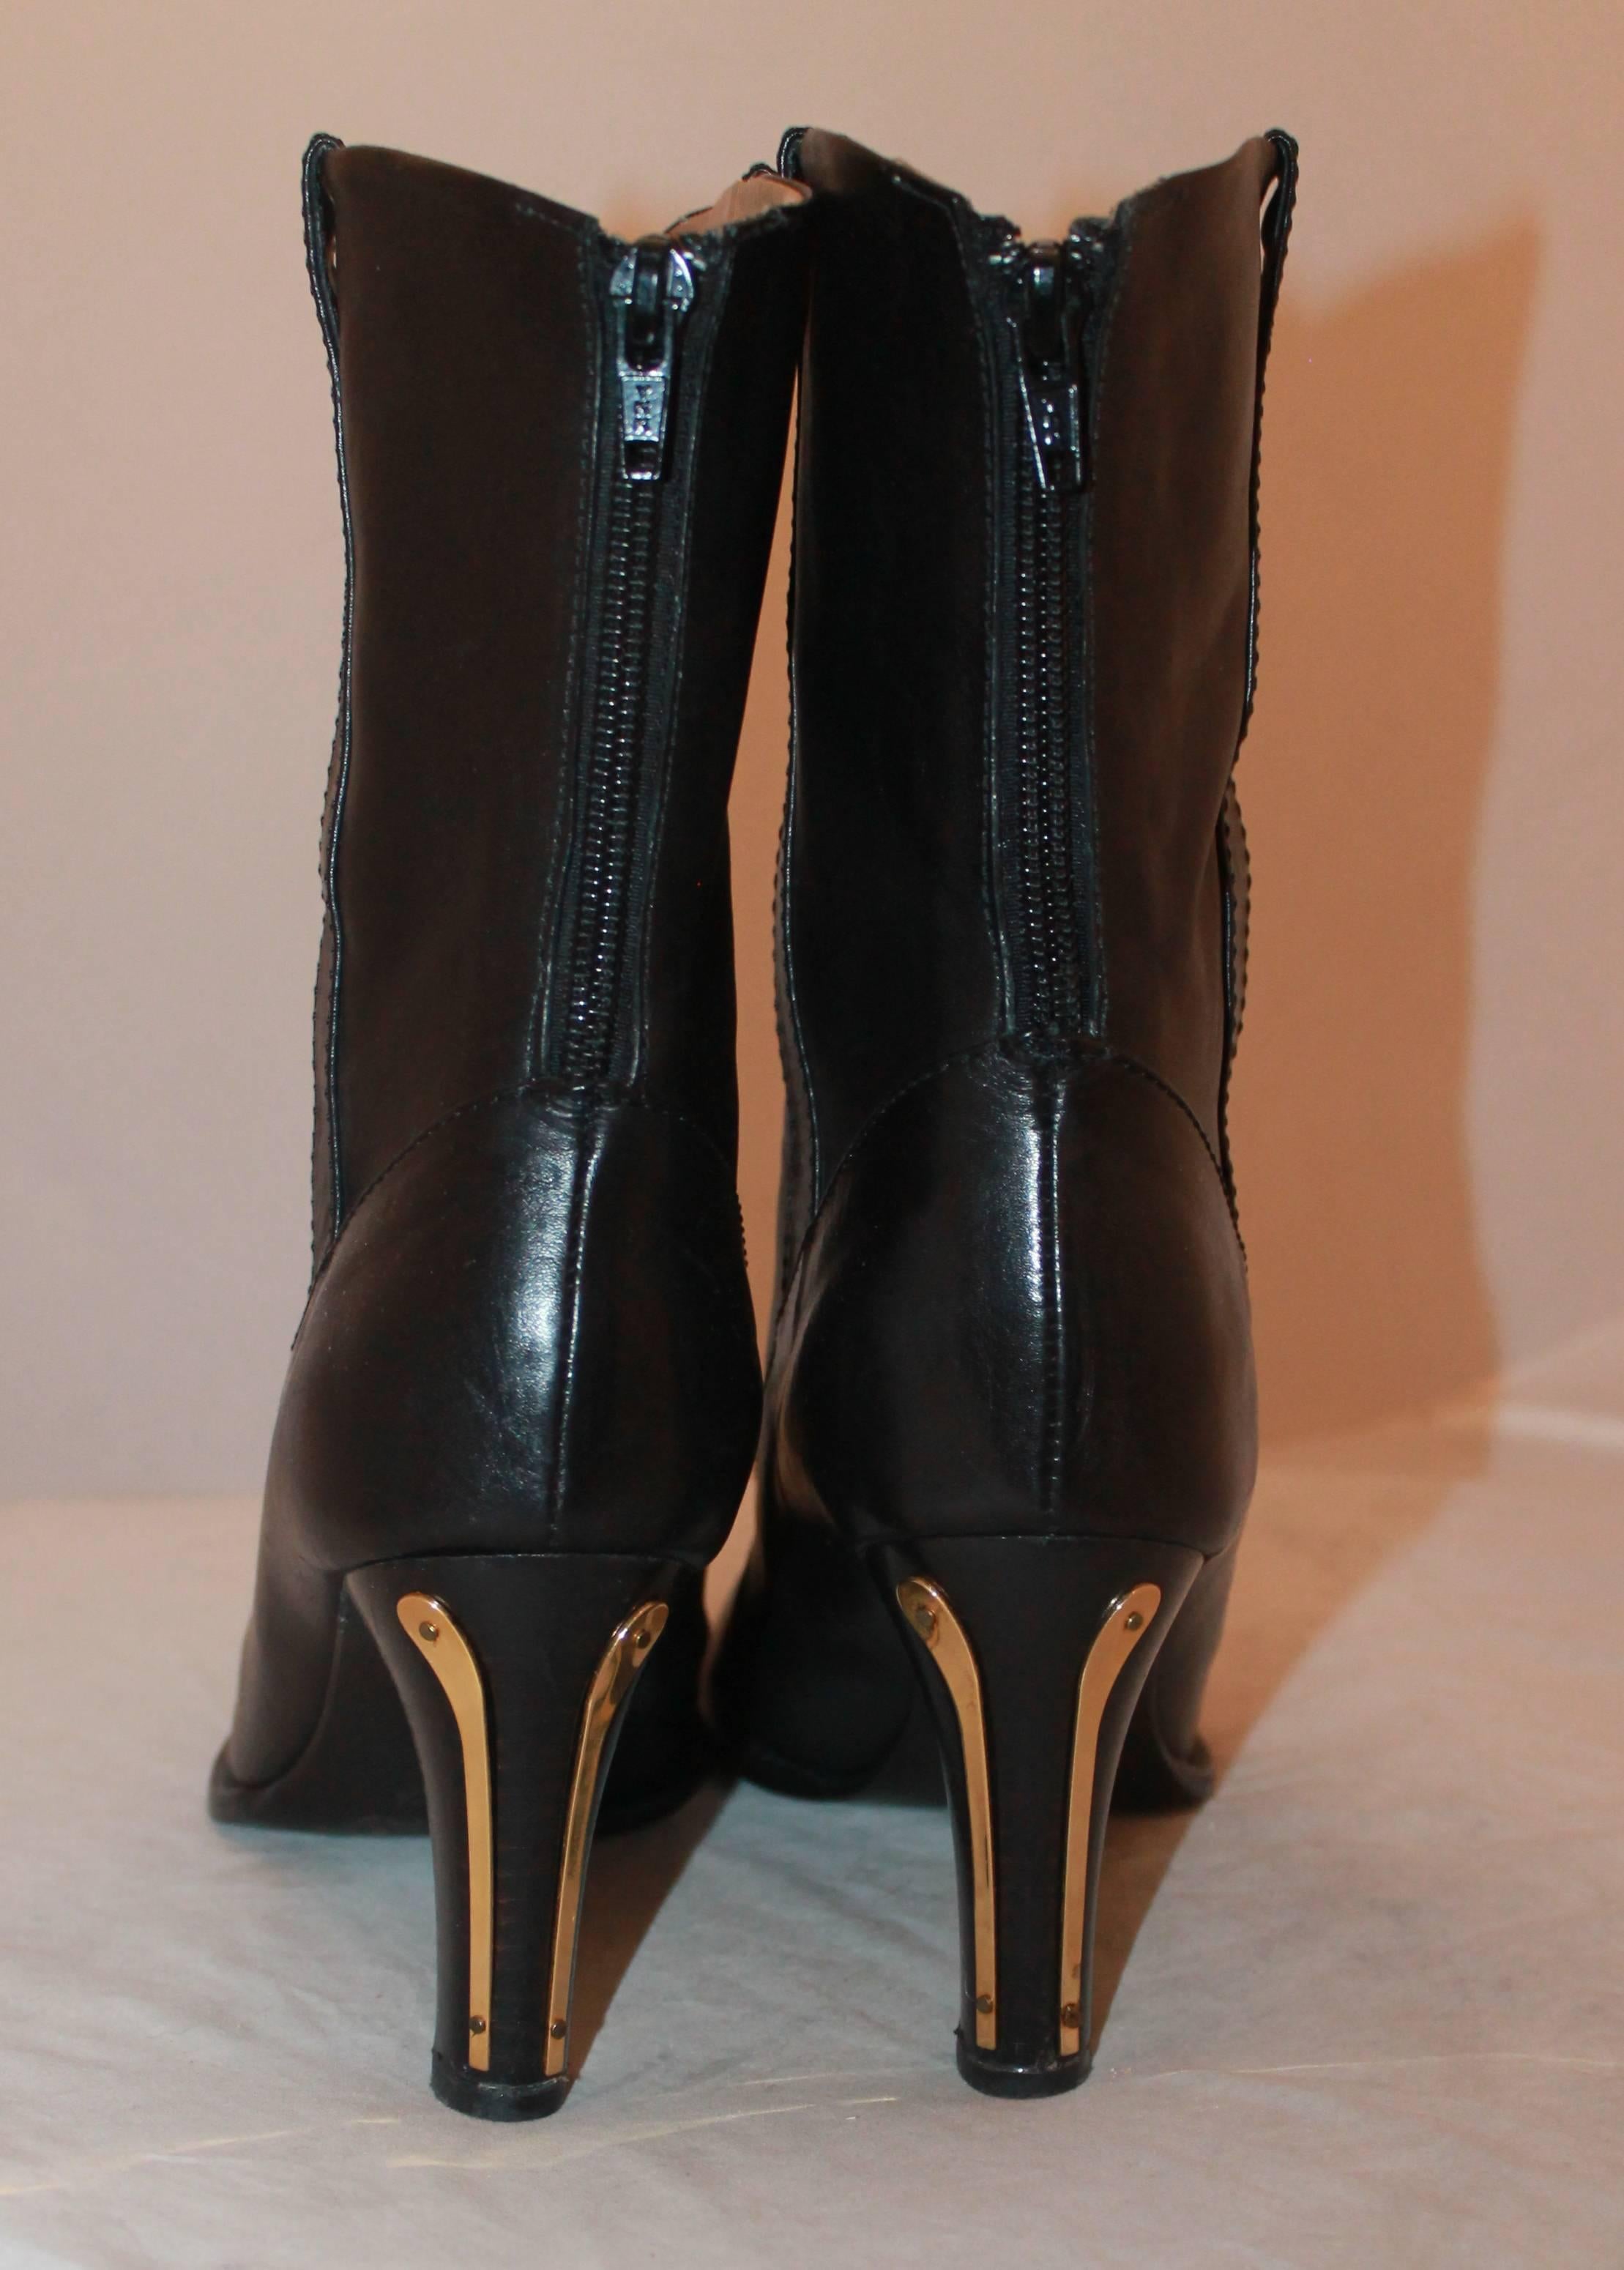 Women's Chloe Black Leather Boots with Gold Detail - 38.5